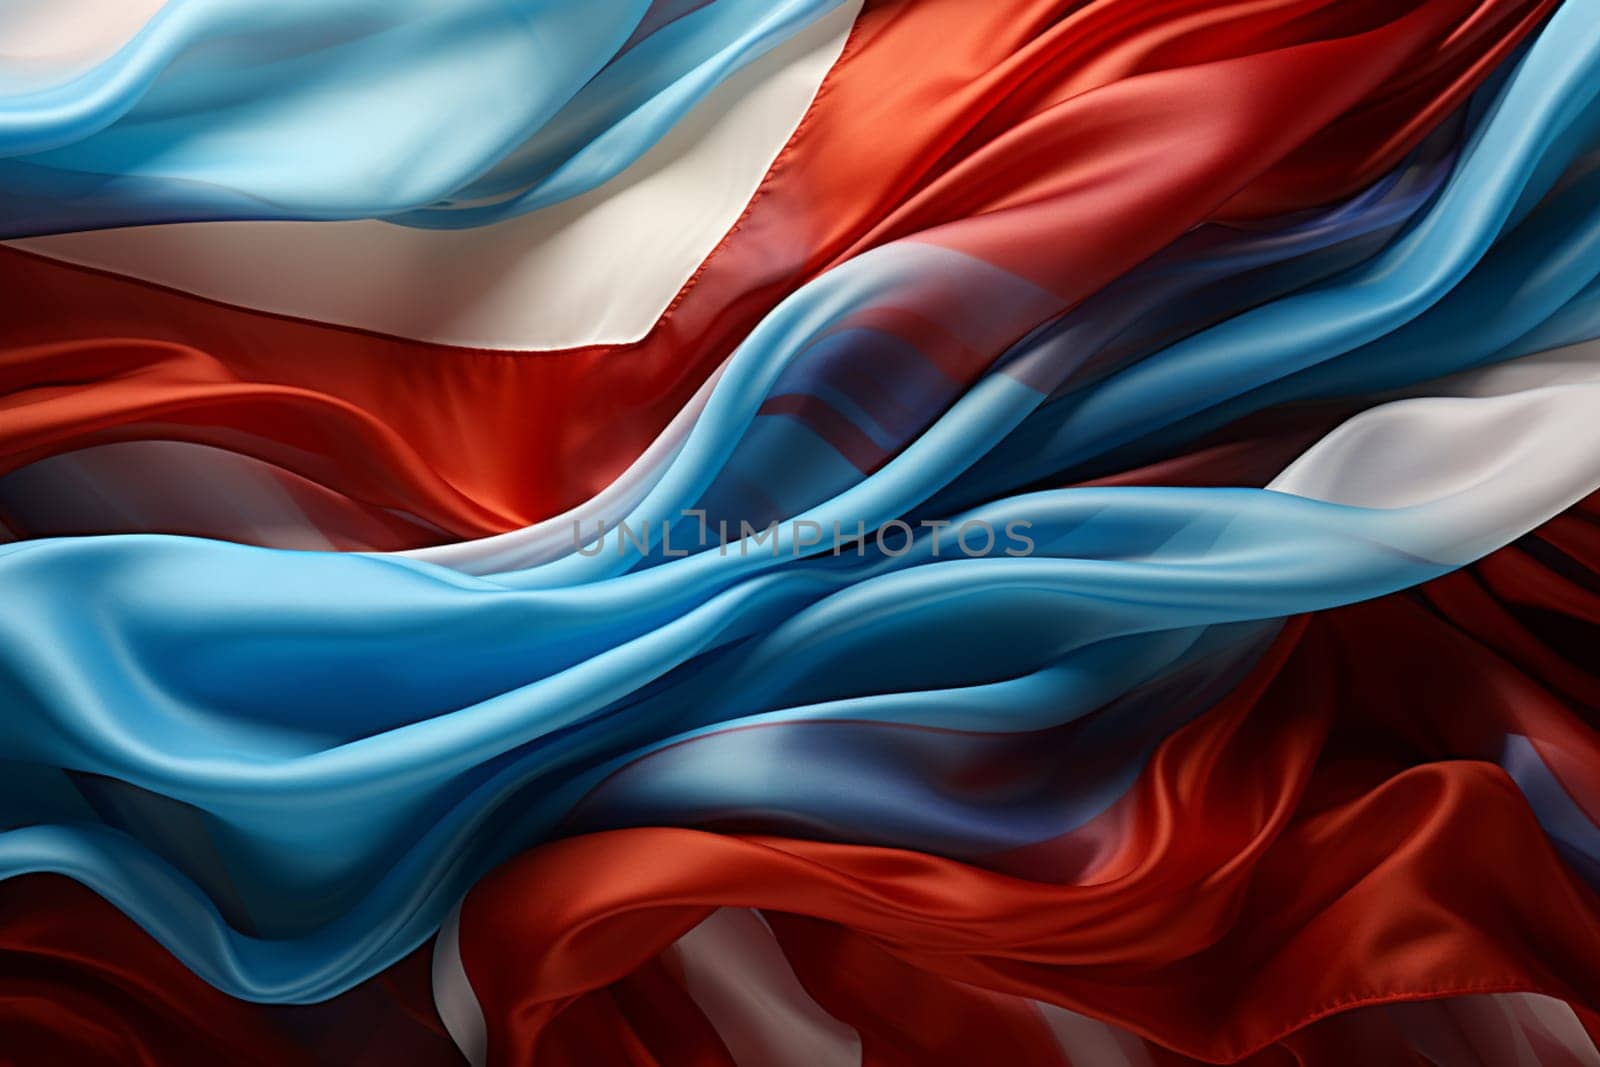 3D Illustration of TriColor Cut Ribbons Waving - Isolated. High quality photo